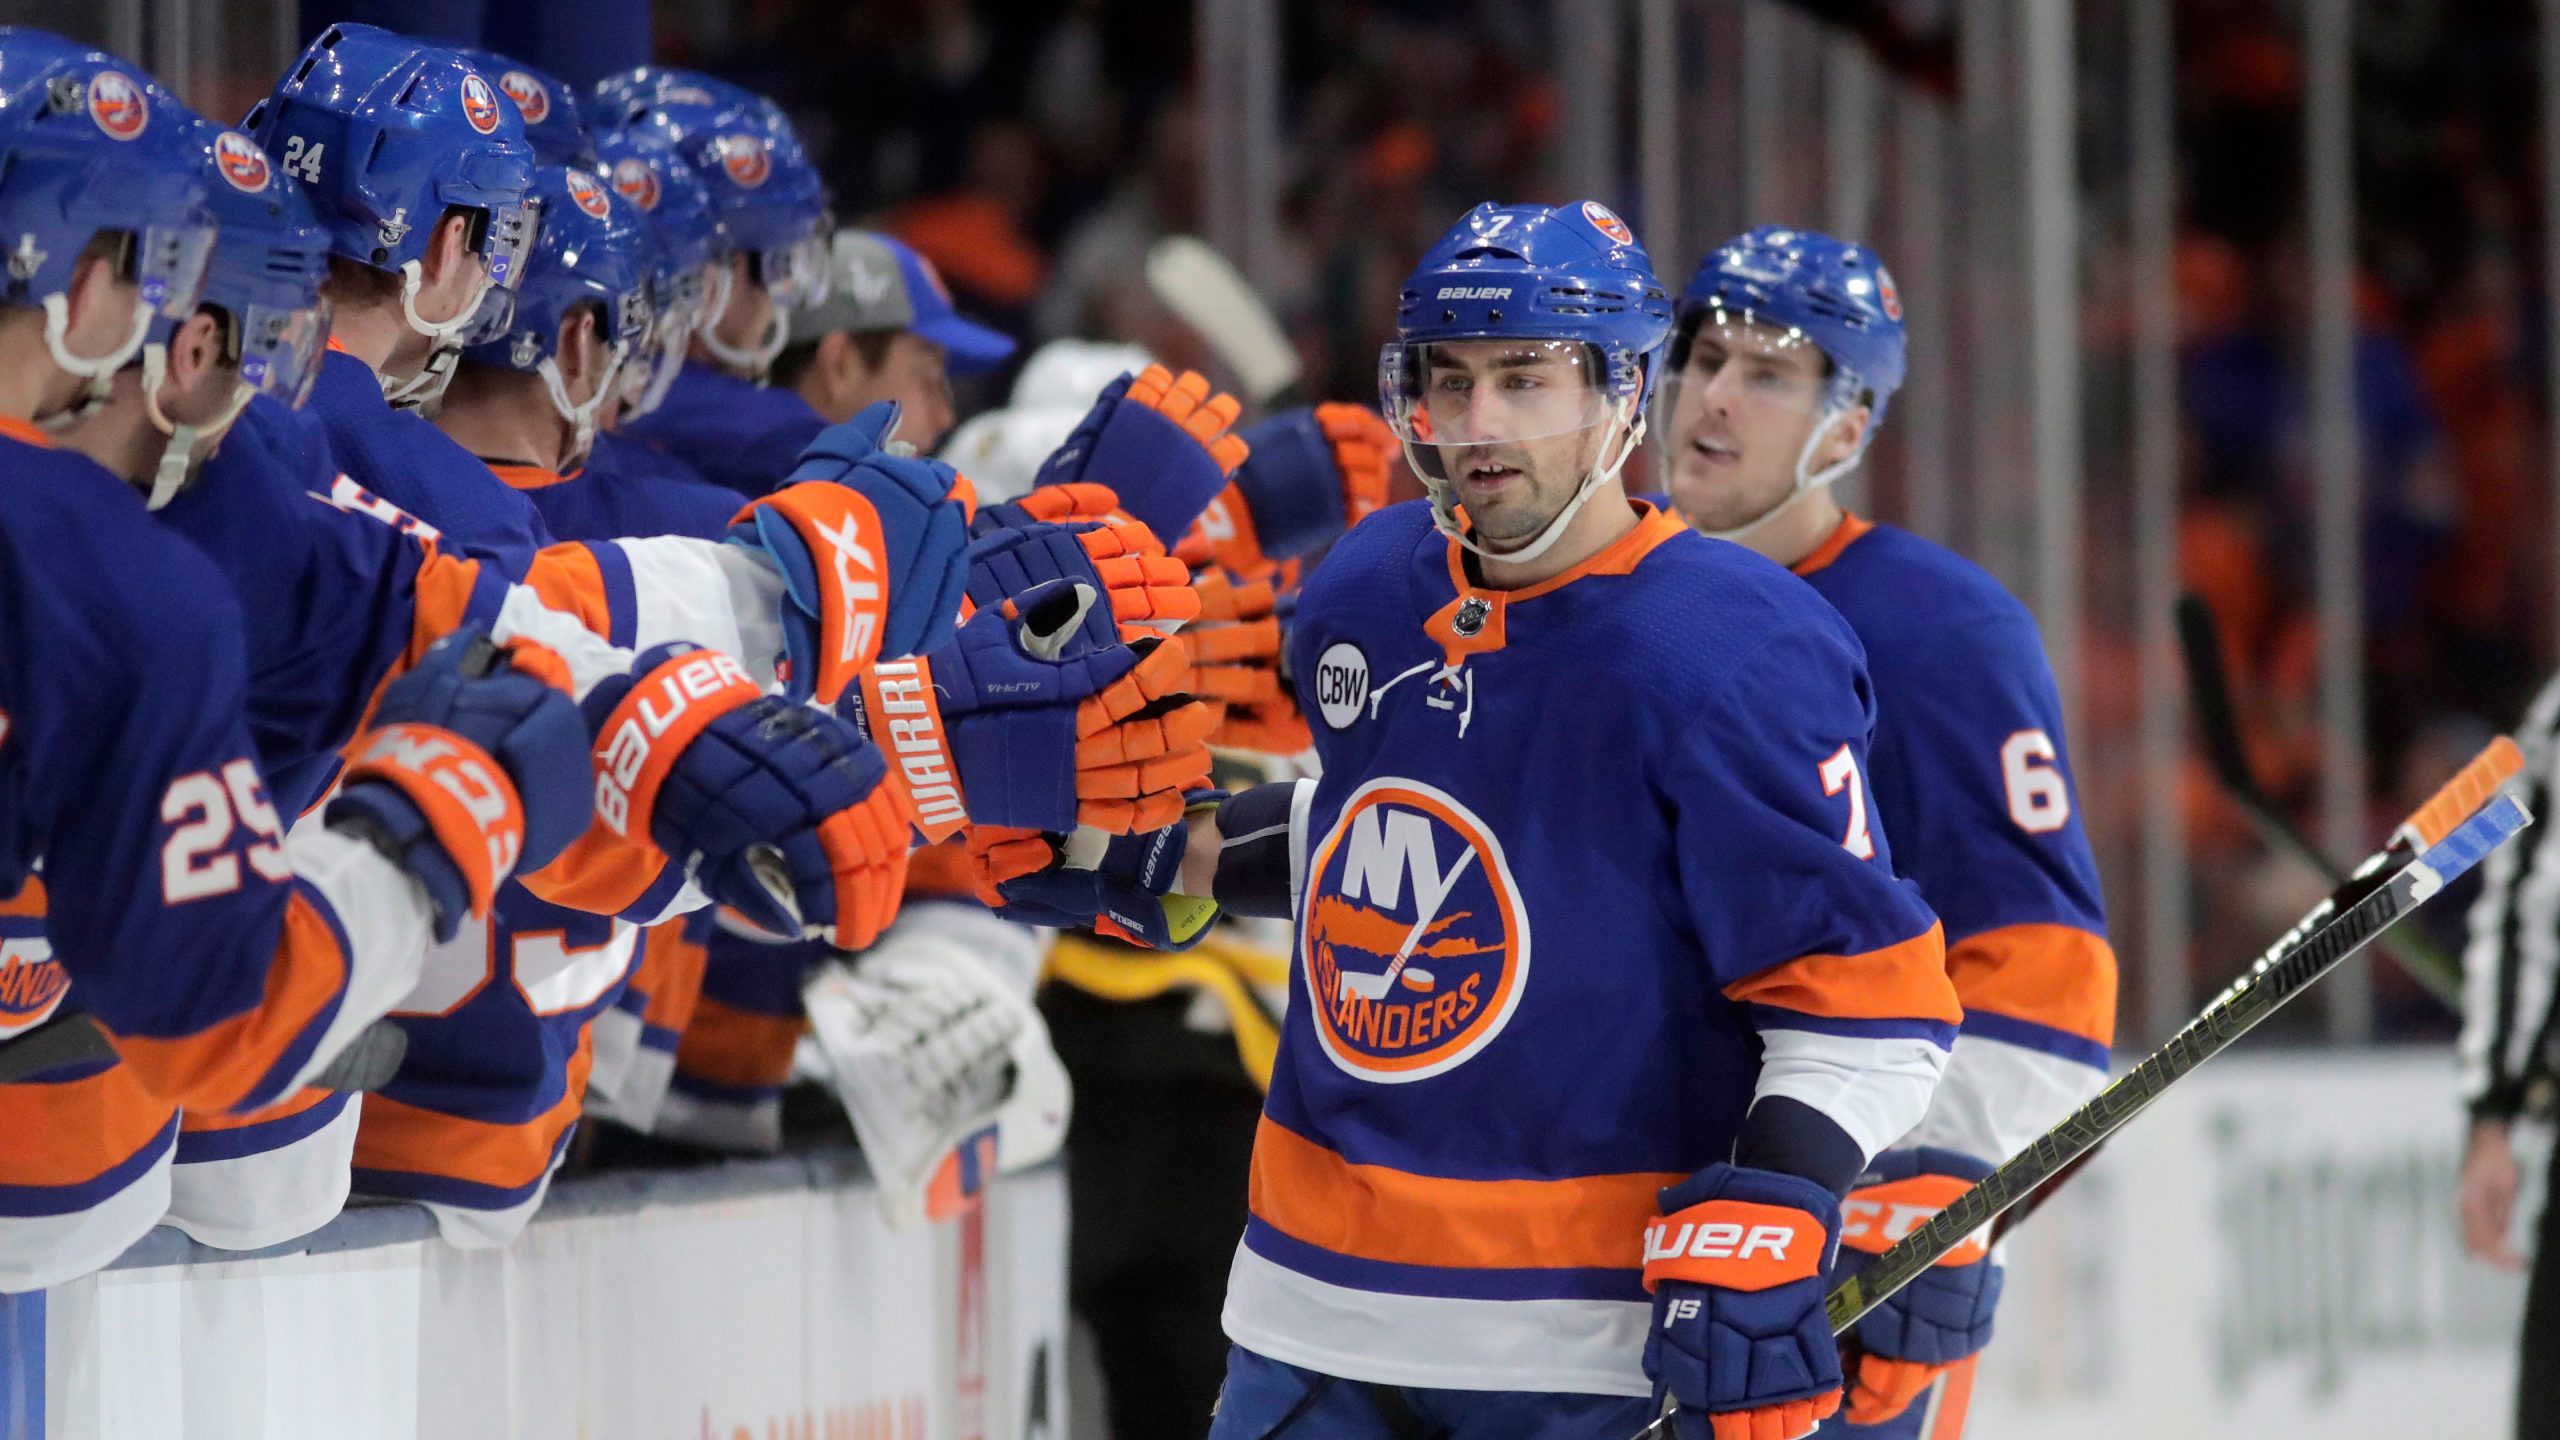 Isles Transaction: The New York Islanders have signed forward